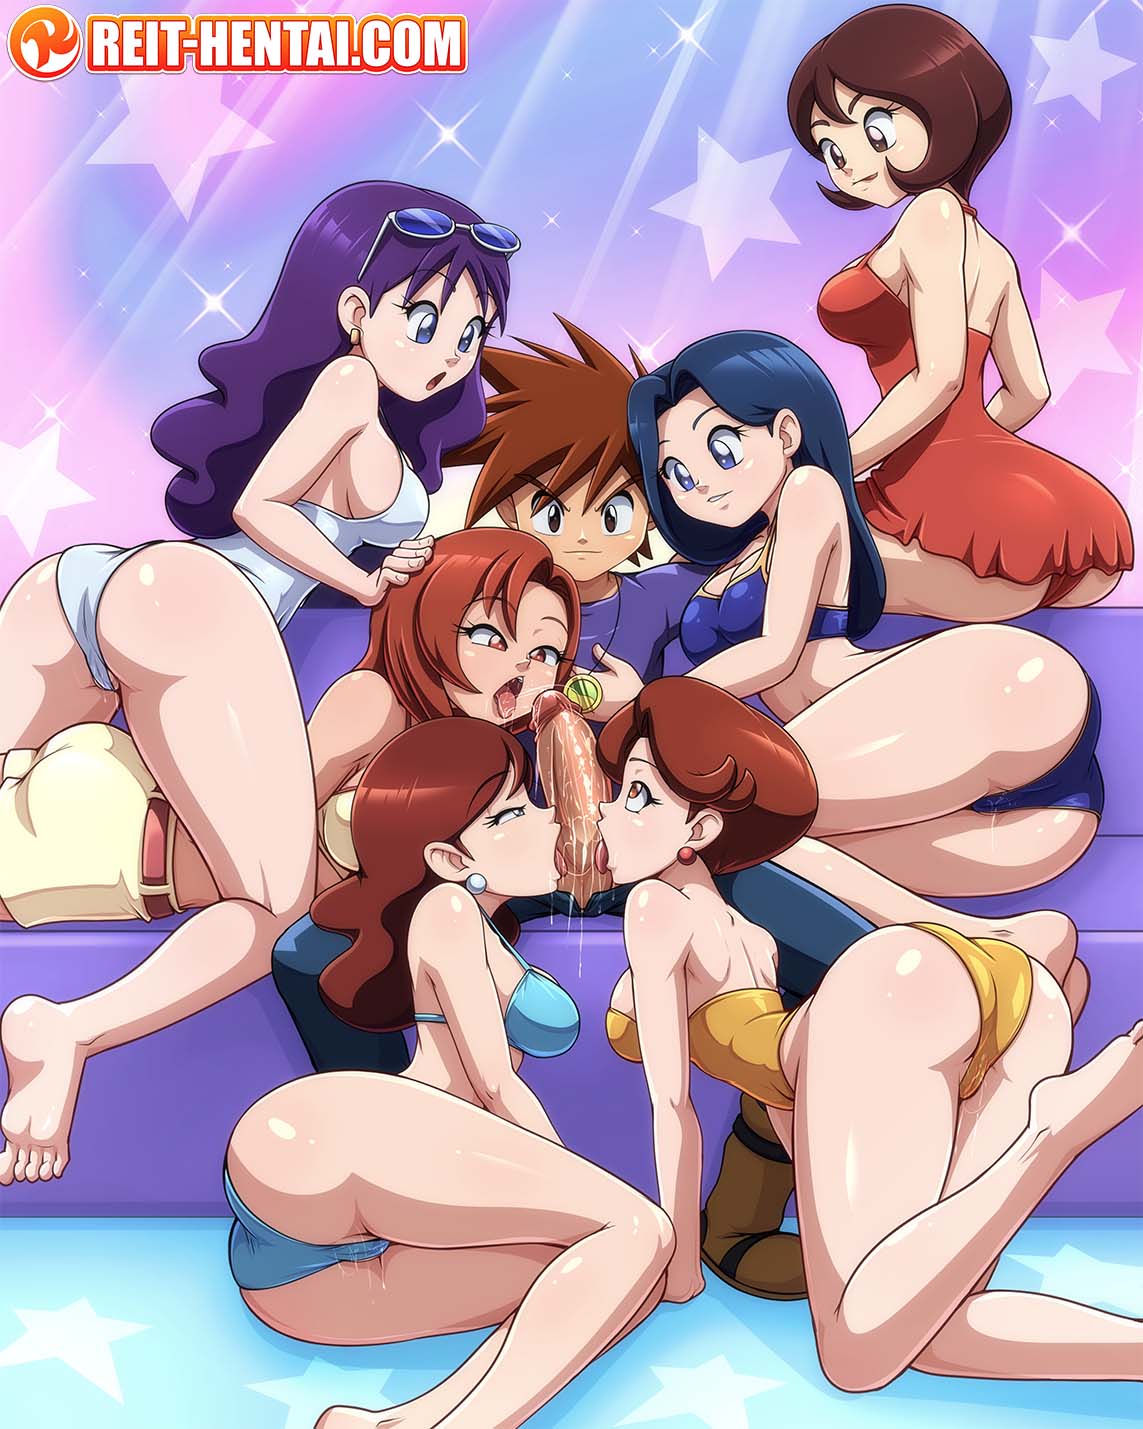 1_boy 1boy 6_girls 6girls ass earrings erection female female_human gary_oak harem huge_penis human human/human imminent_oral licking_penis looking_at_penis male male_human mostly_nude multiple_girls naughty_face open_mouth partially_visible_vulva penis penis_grab pokemon pokemon_character pokemon_trainer reit sucking_penis sucking_testicles swimsuit tongue_out uncensored vaginal_sex veiny_penis